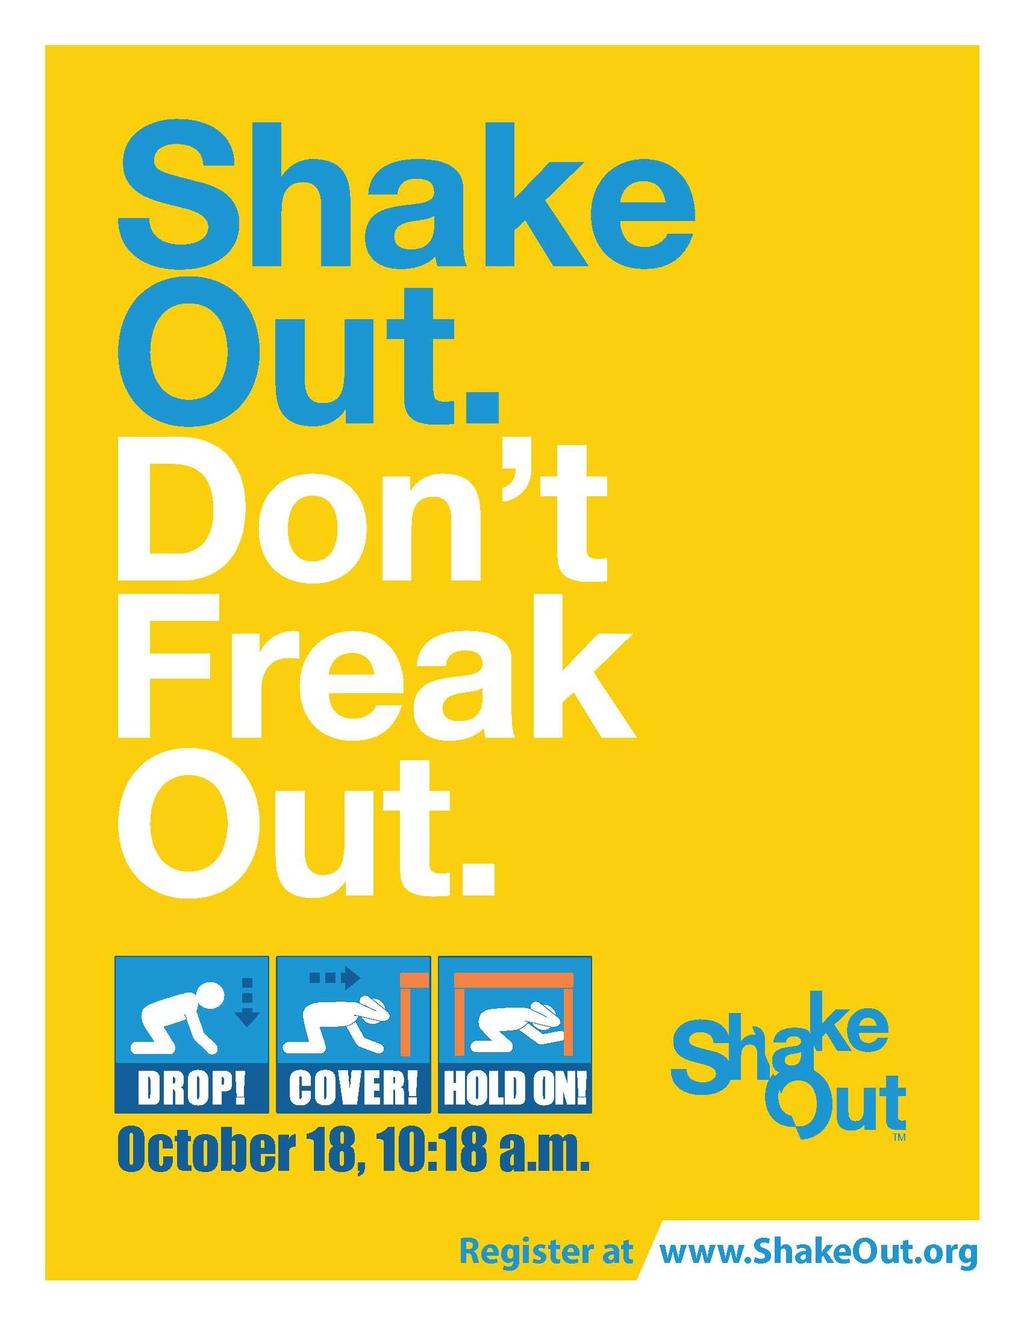 Register to participate at: https://www.shakeout.